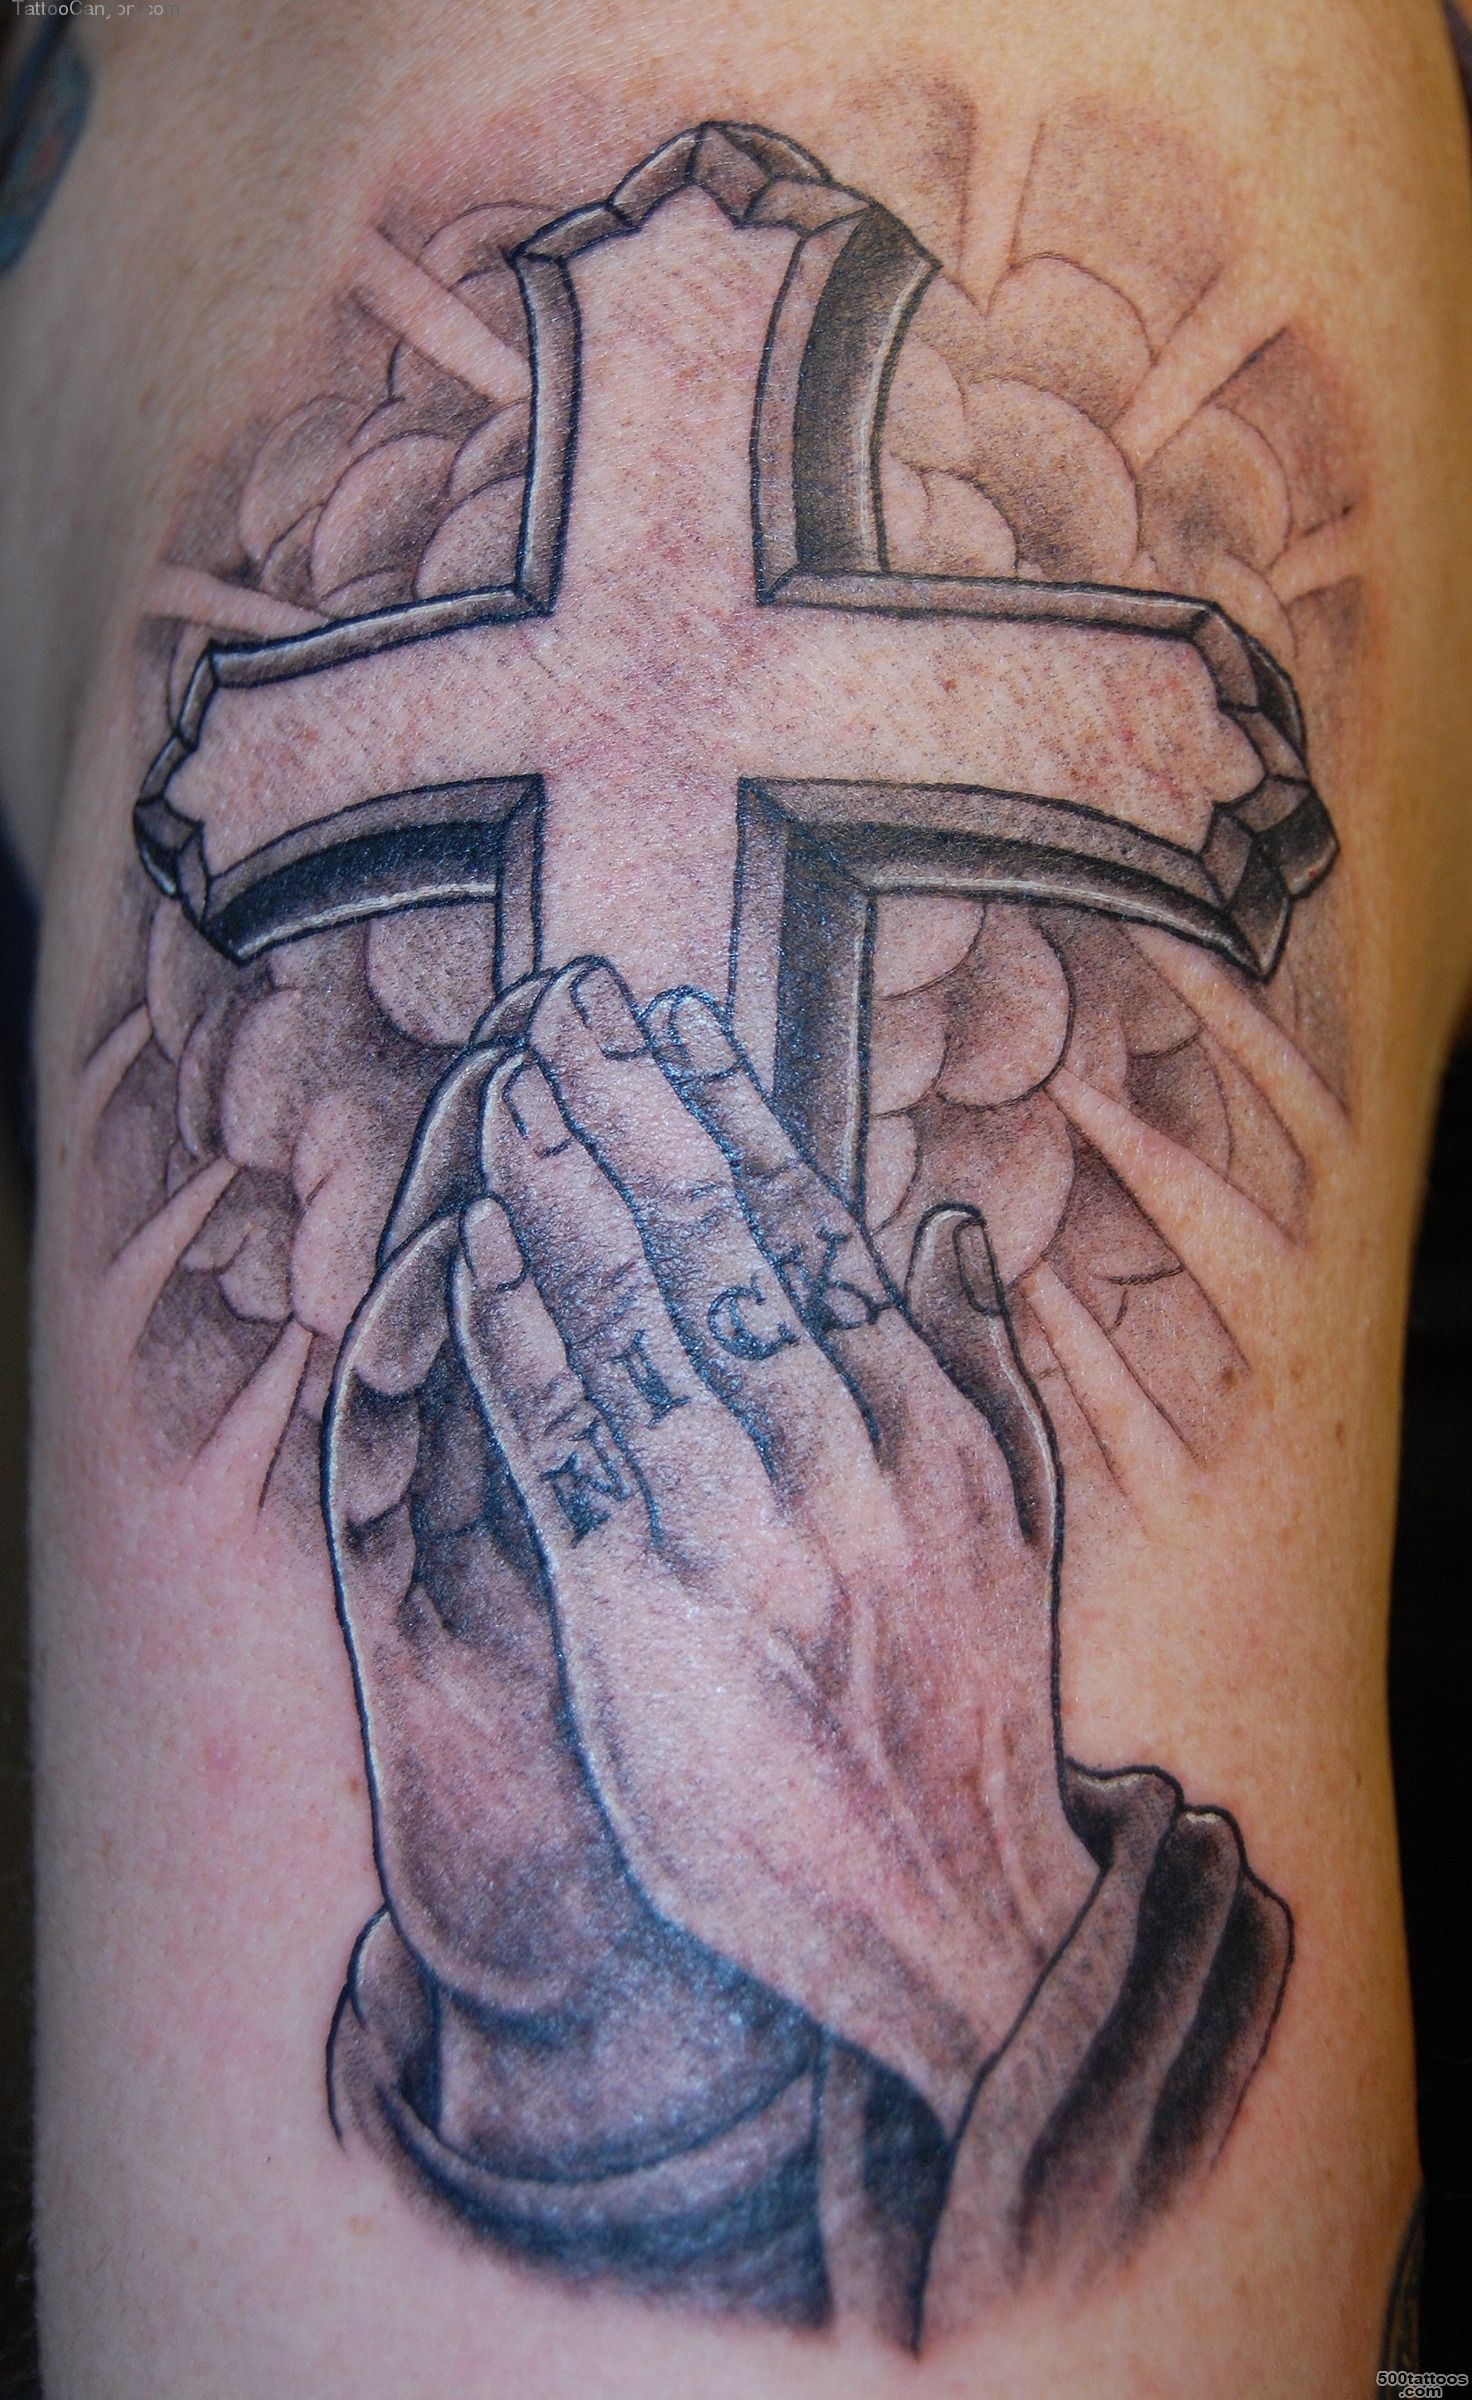 Christian Tattoos, Designs And Ideas  Page 5_20